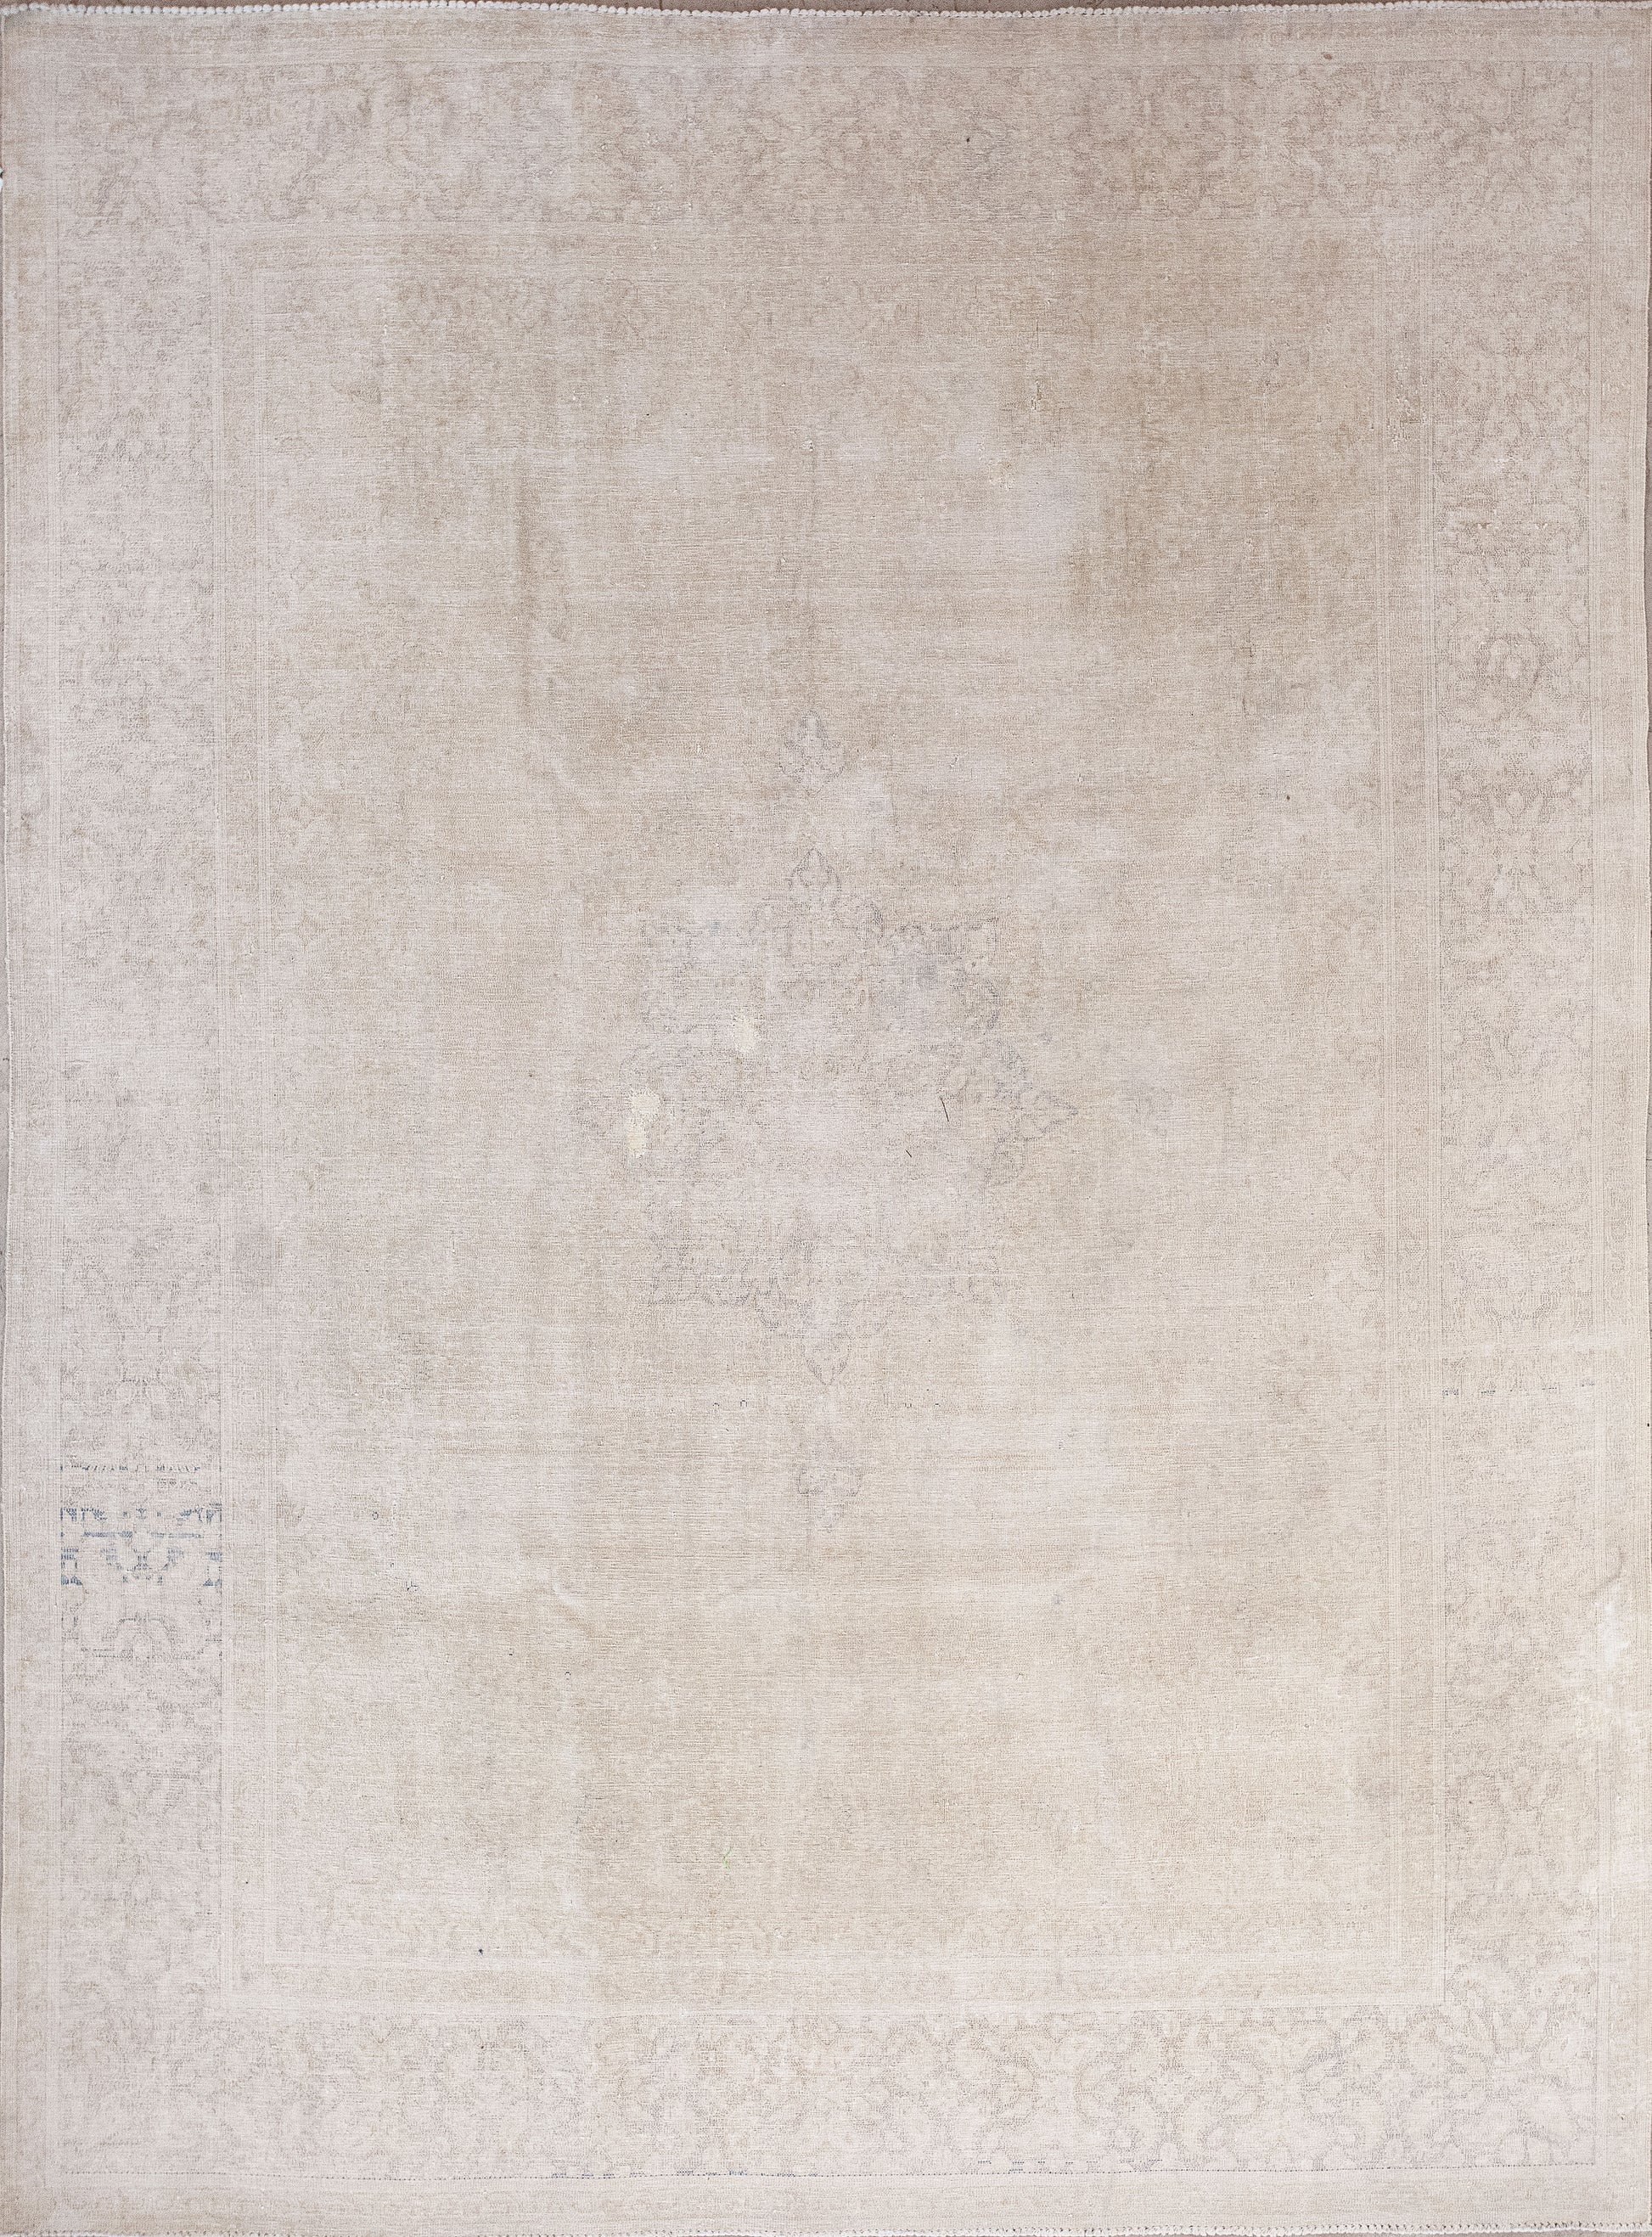 Ancient rug was woven in white with a faint flower pattern. The simple color palette has linen and antique white.